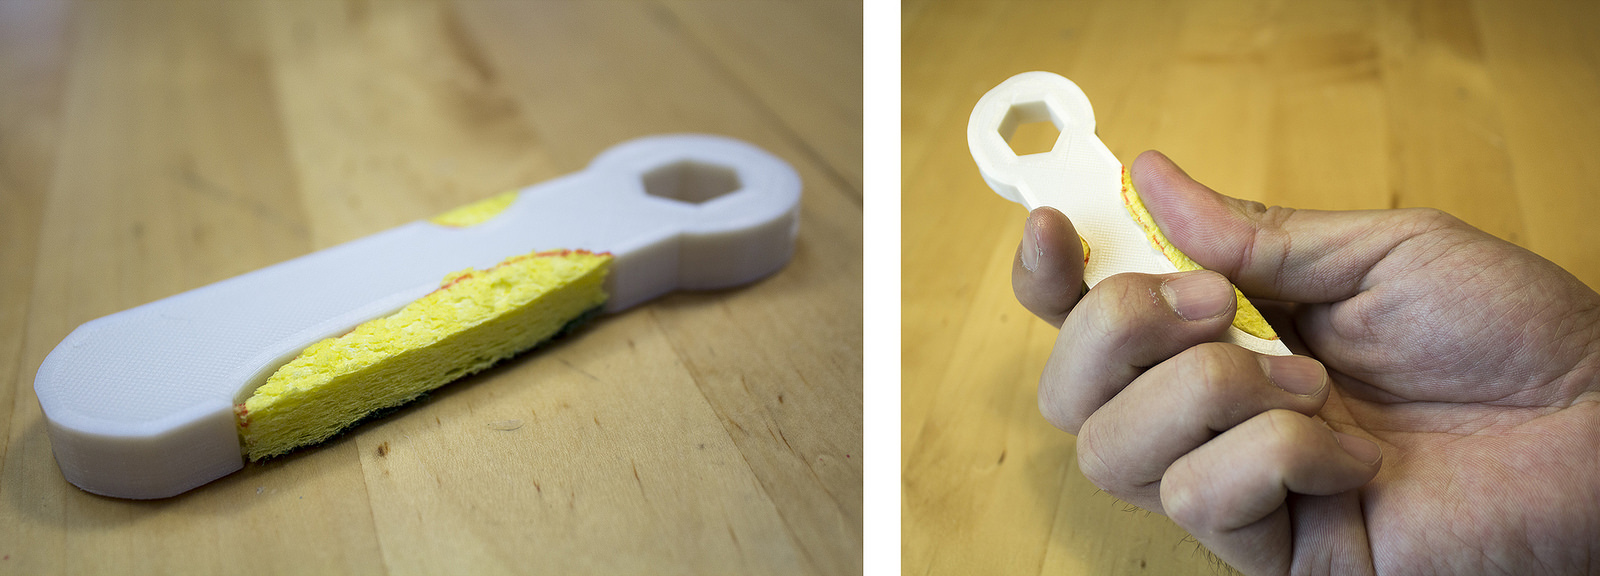 Image: Medley: Enhancing 3D Printed Objects with Embedded Materials